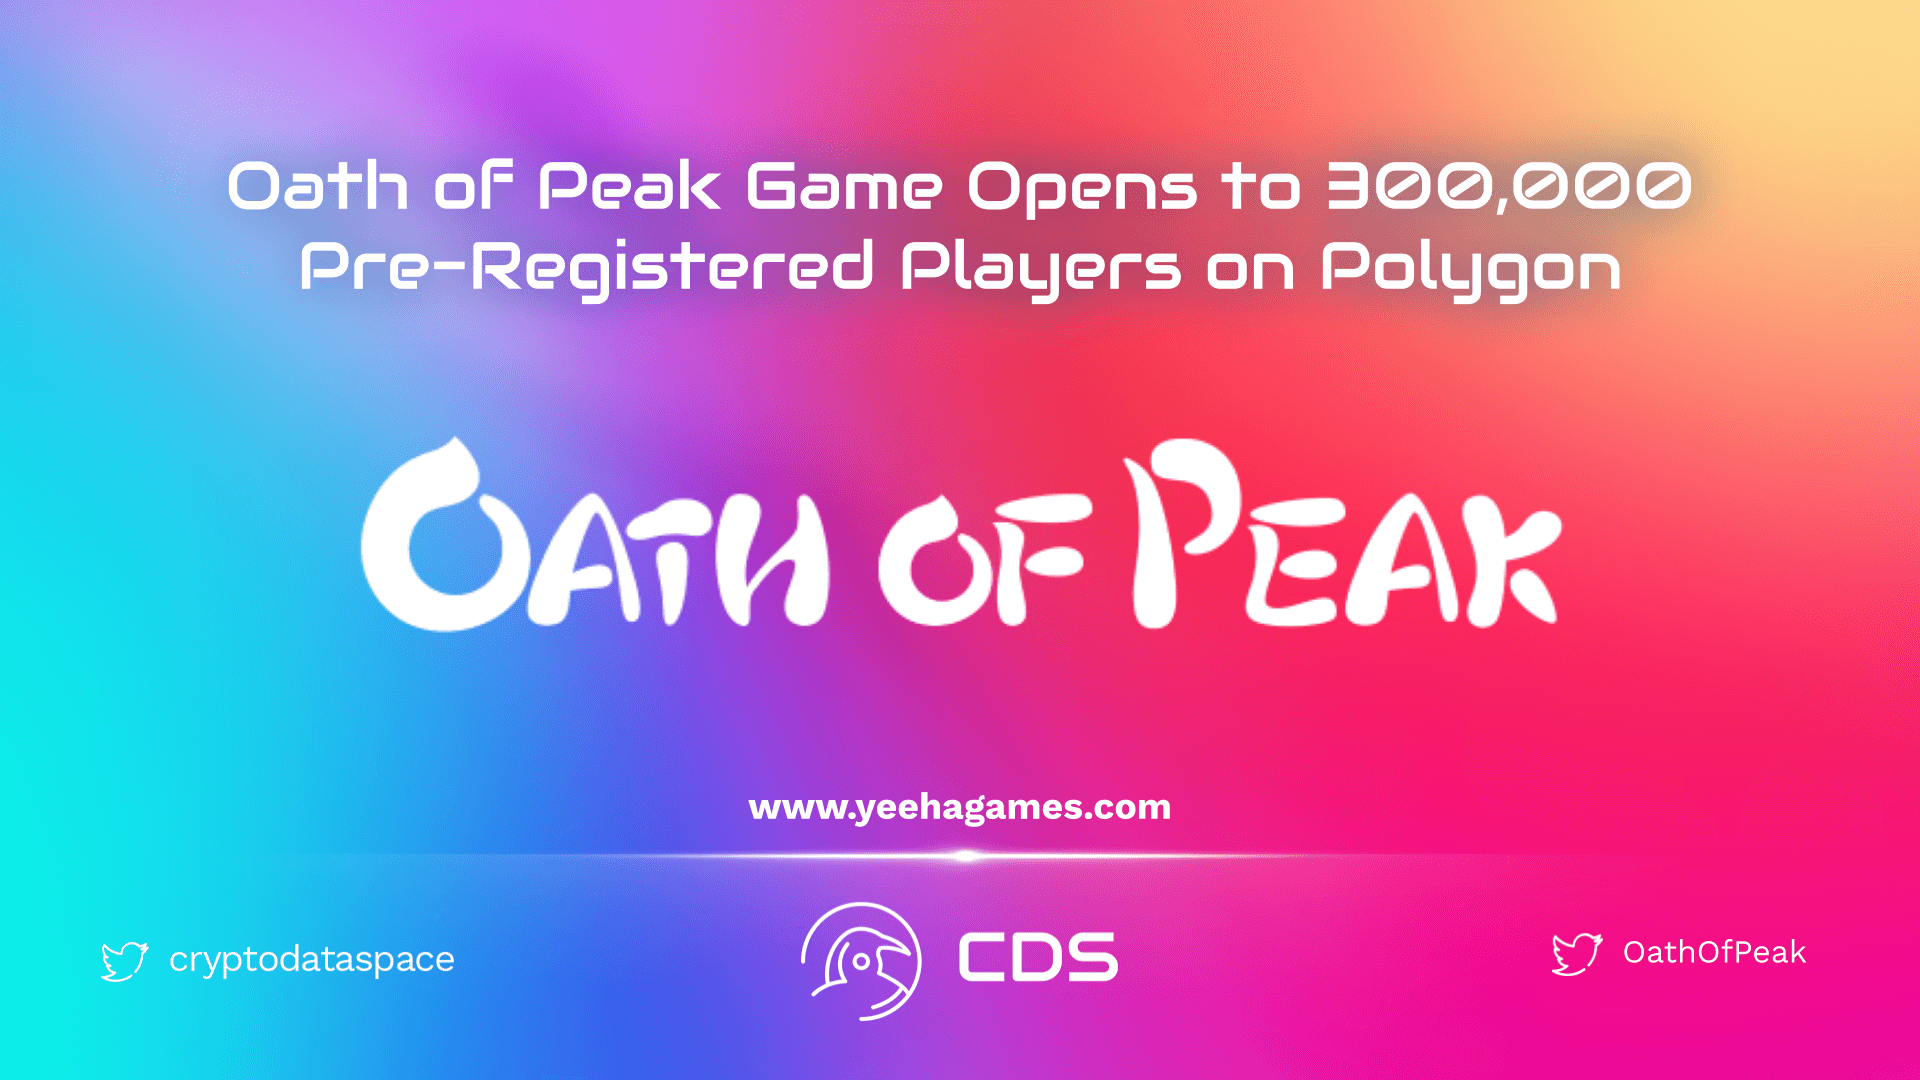 Oath of Peak Game Opens to 300,000 Pre-Registered Players on Polygon